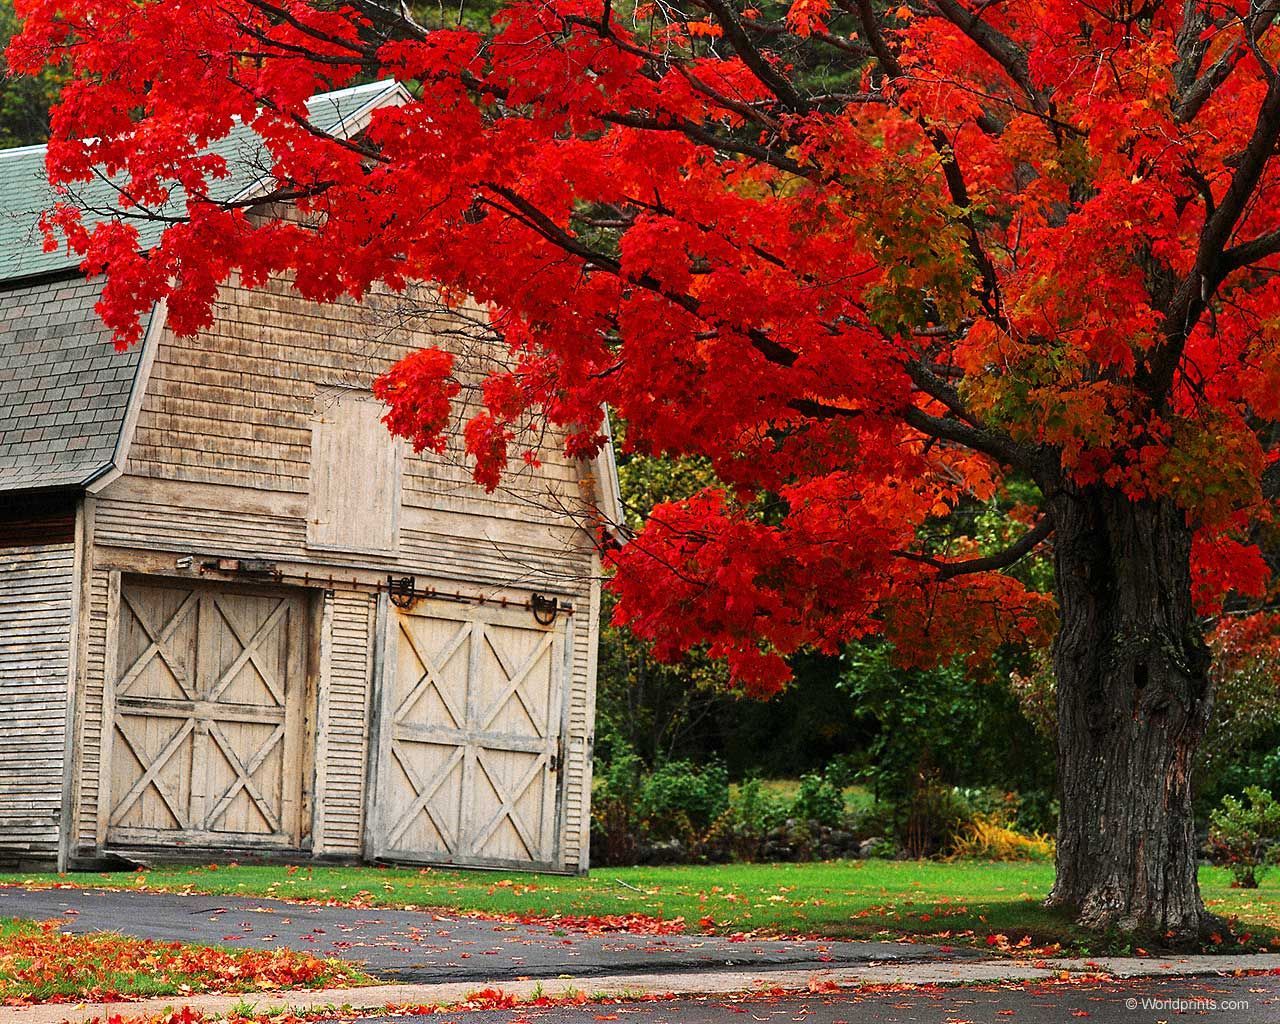 Top Five Friday. Trees with red leaves, Old barns, Autumn photography